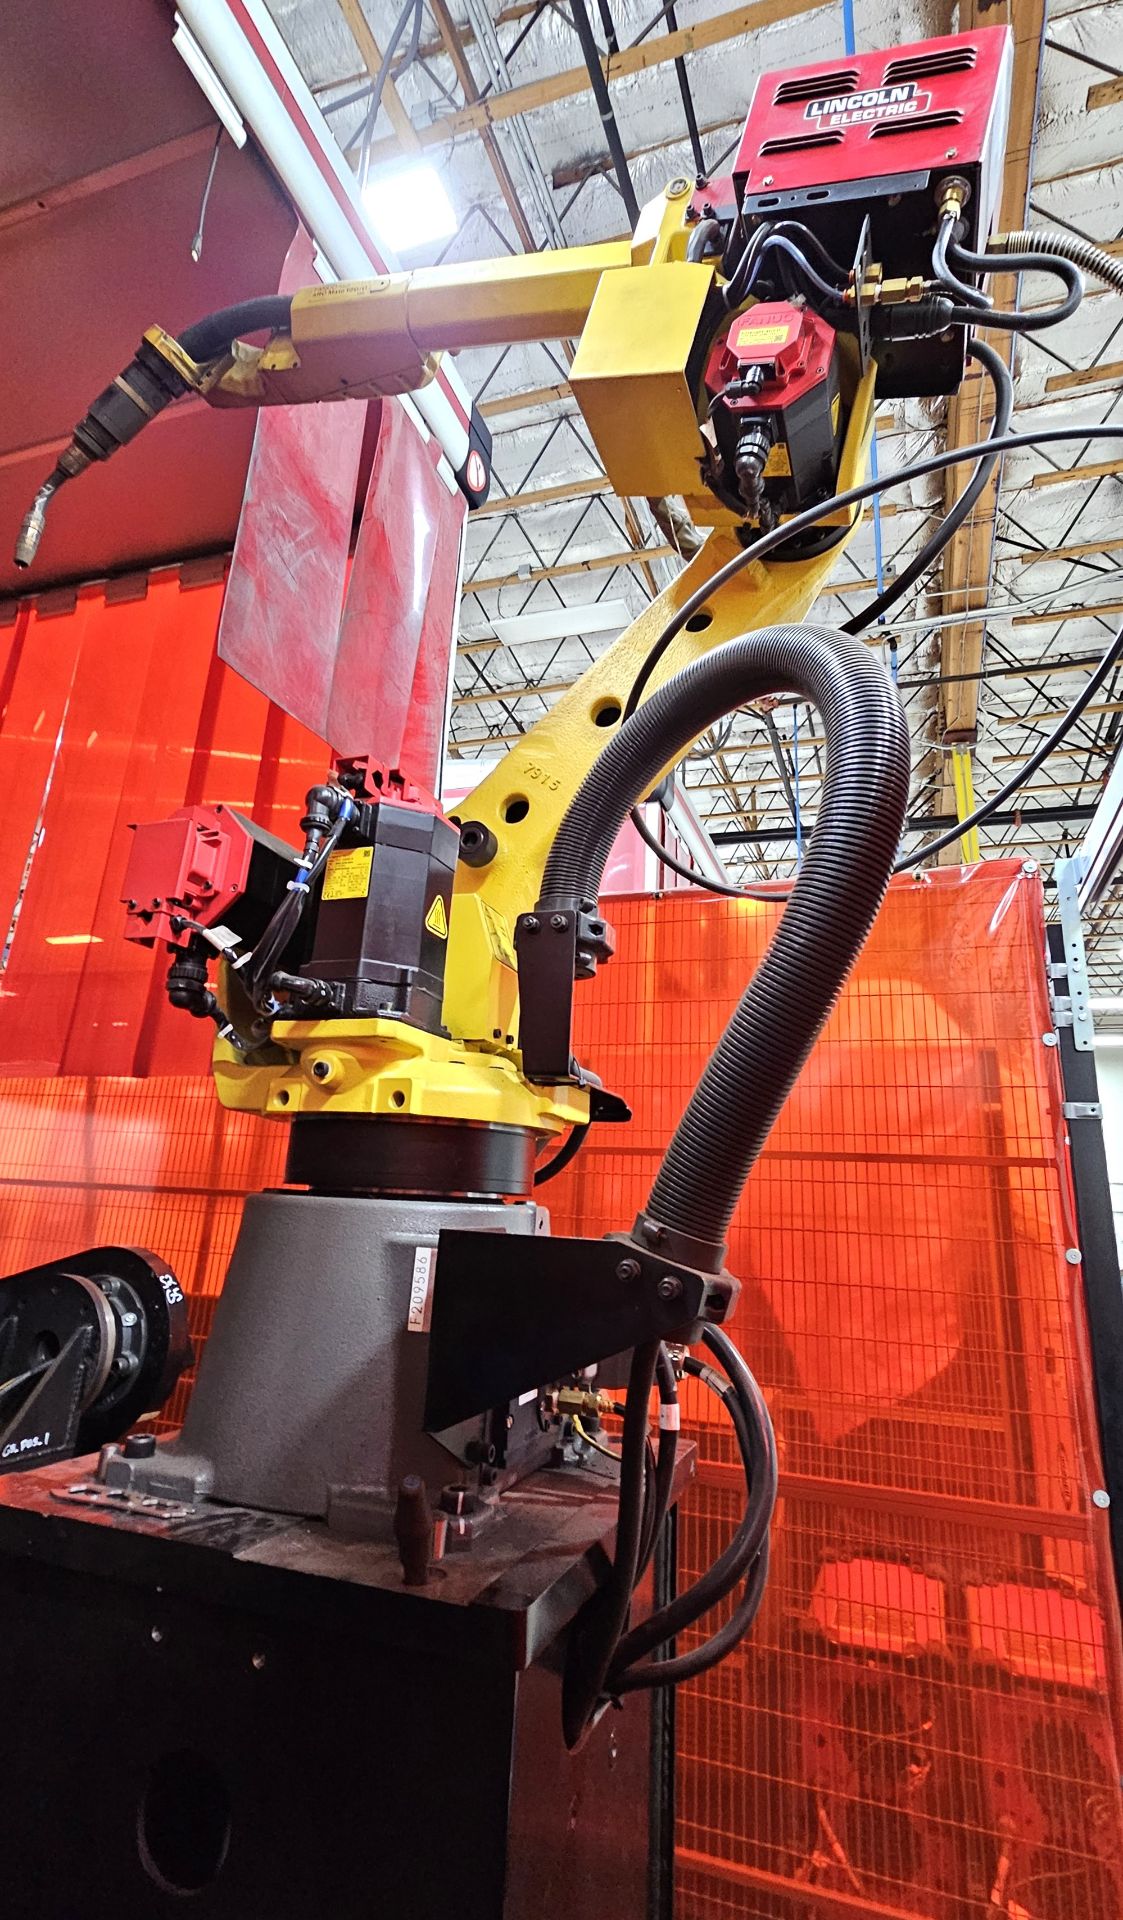 Lincoln/Fanuc Robotic Welding System - Image 13 of 22